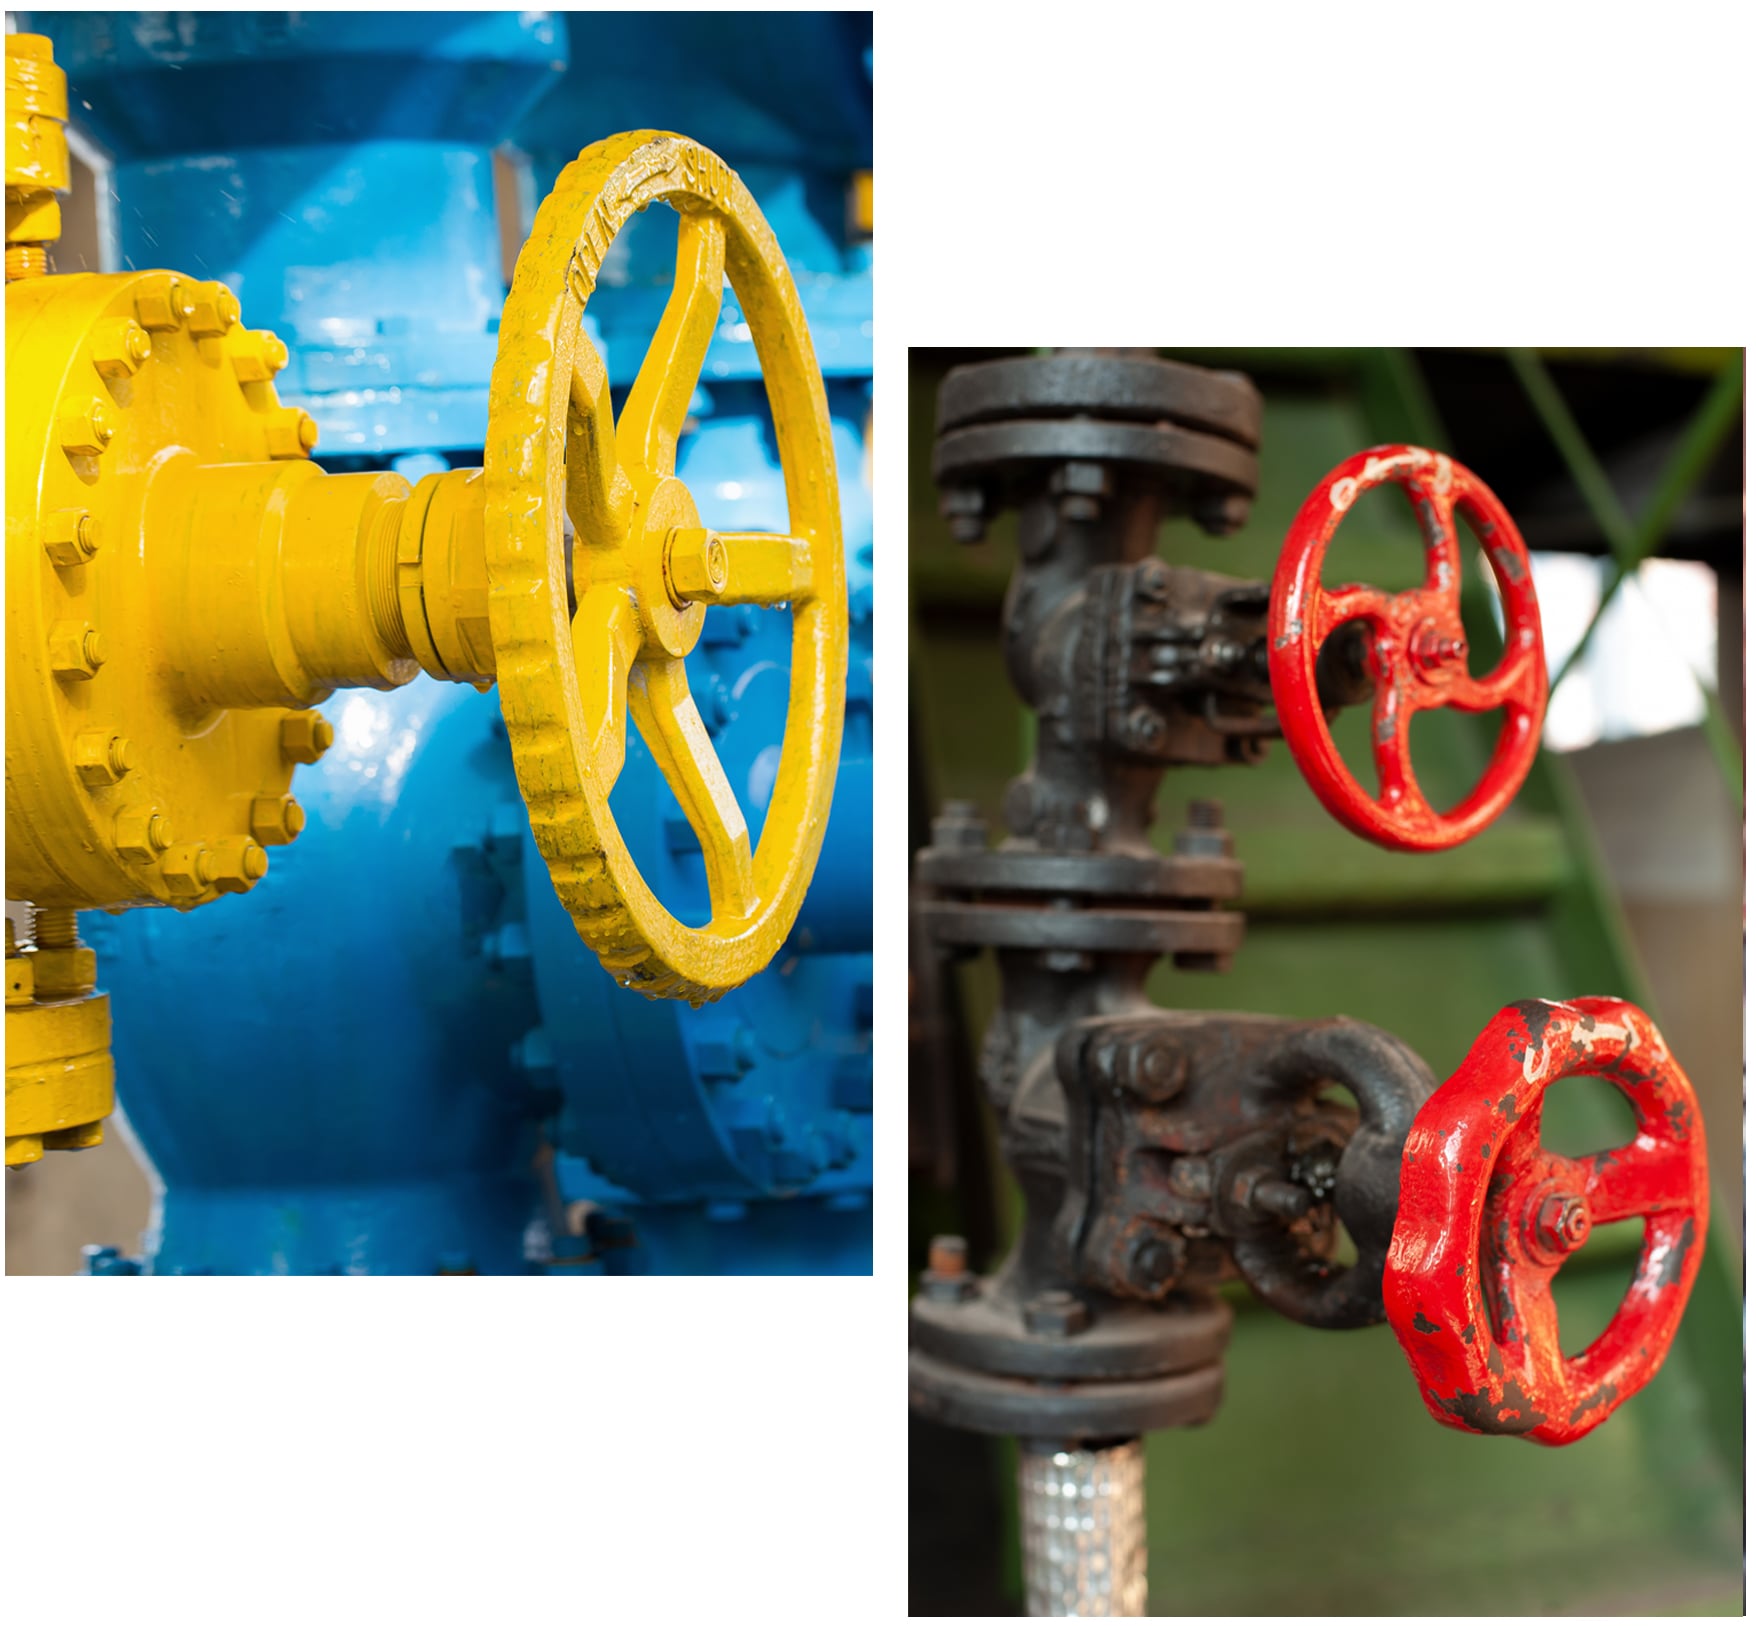 A collage image of industrial valves from AlterValve.